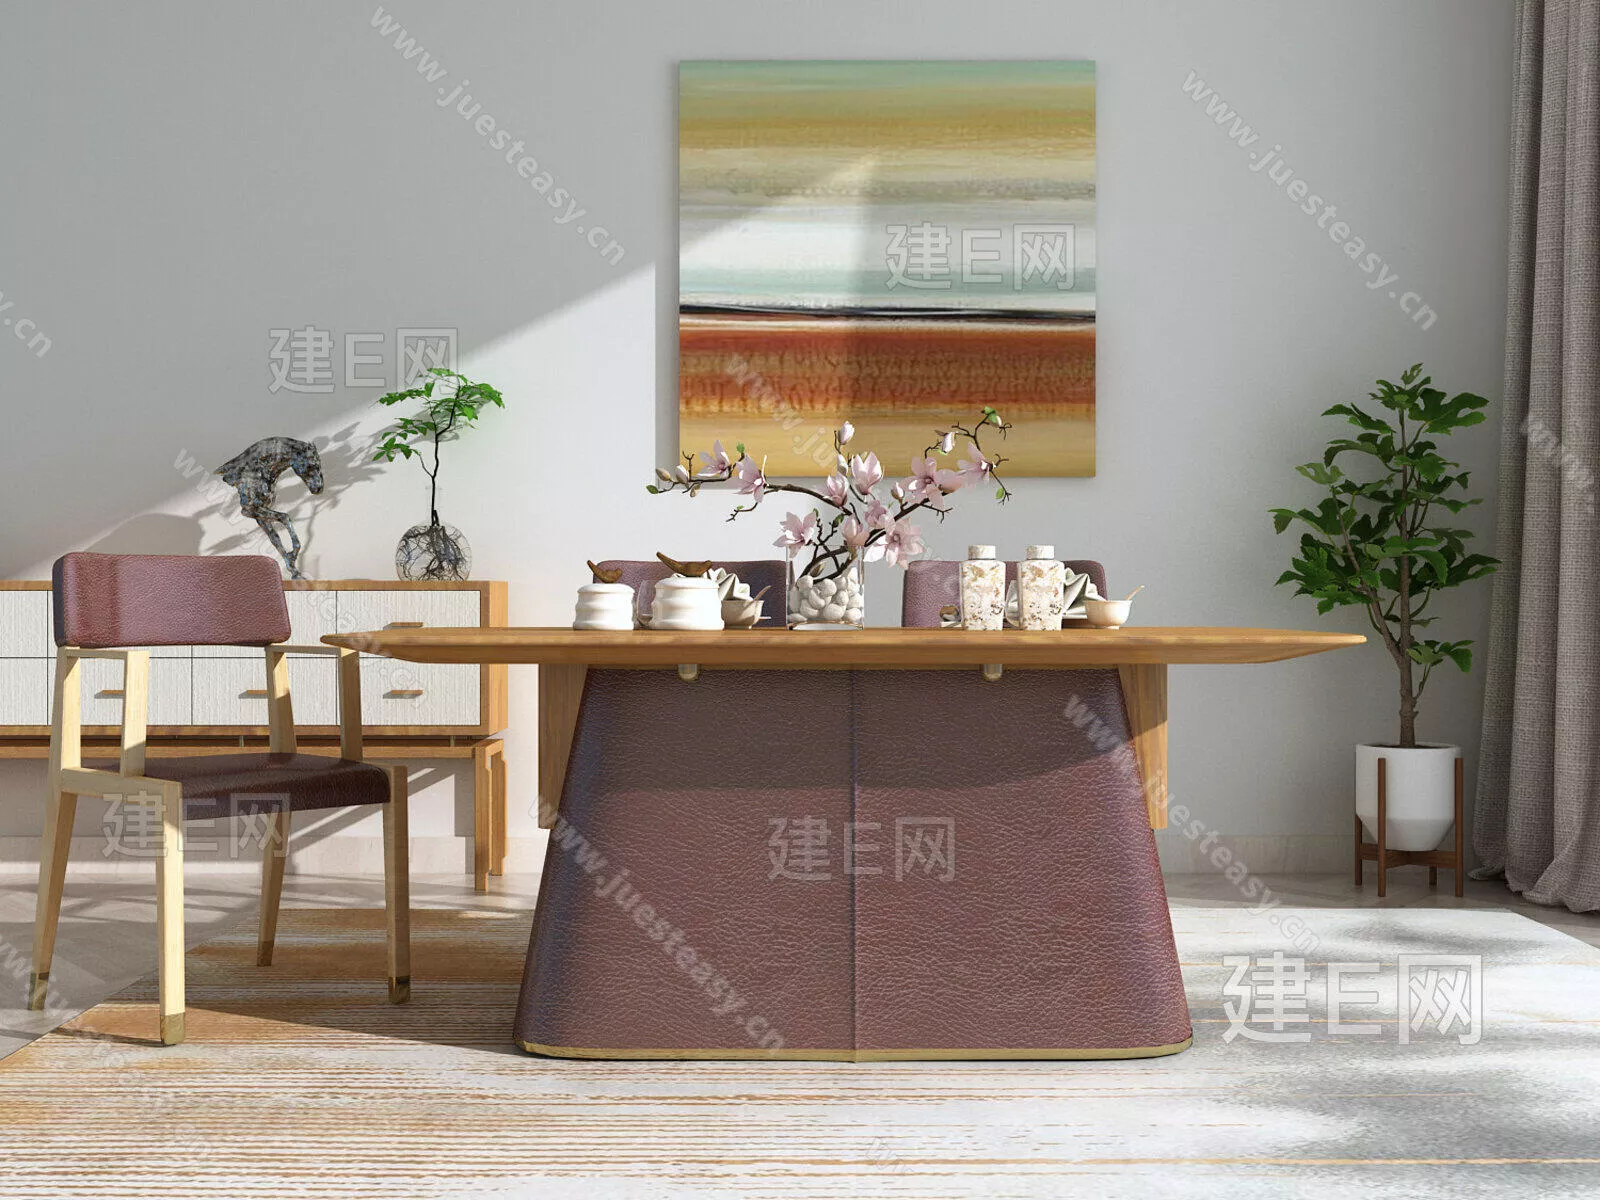 CHINESE DINING TABLE SET - SKETCHUP 3D MODEL - ENSCAPE - 112217593